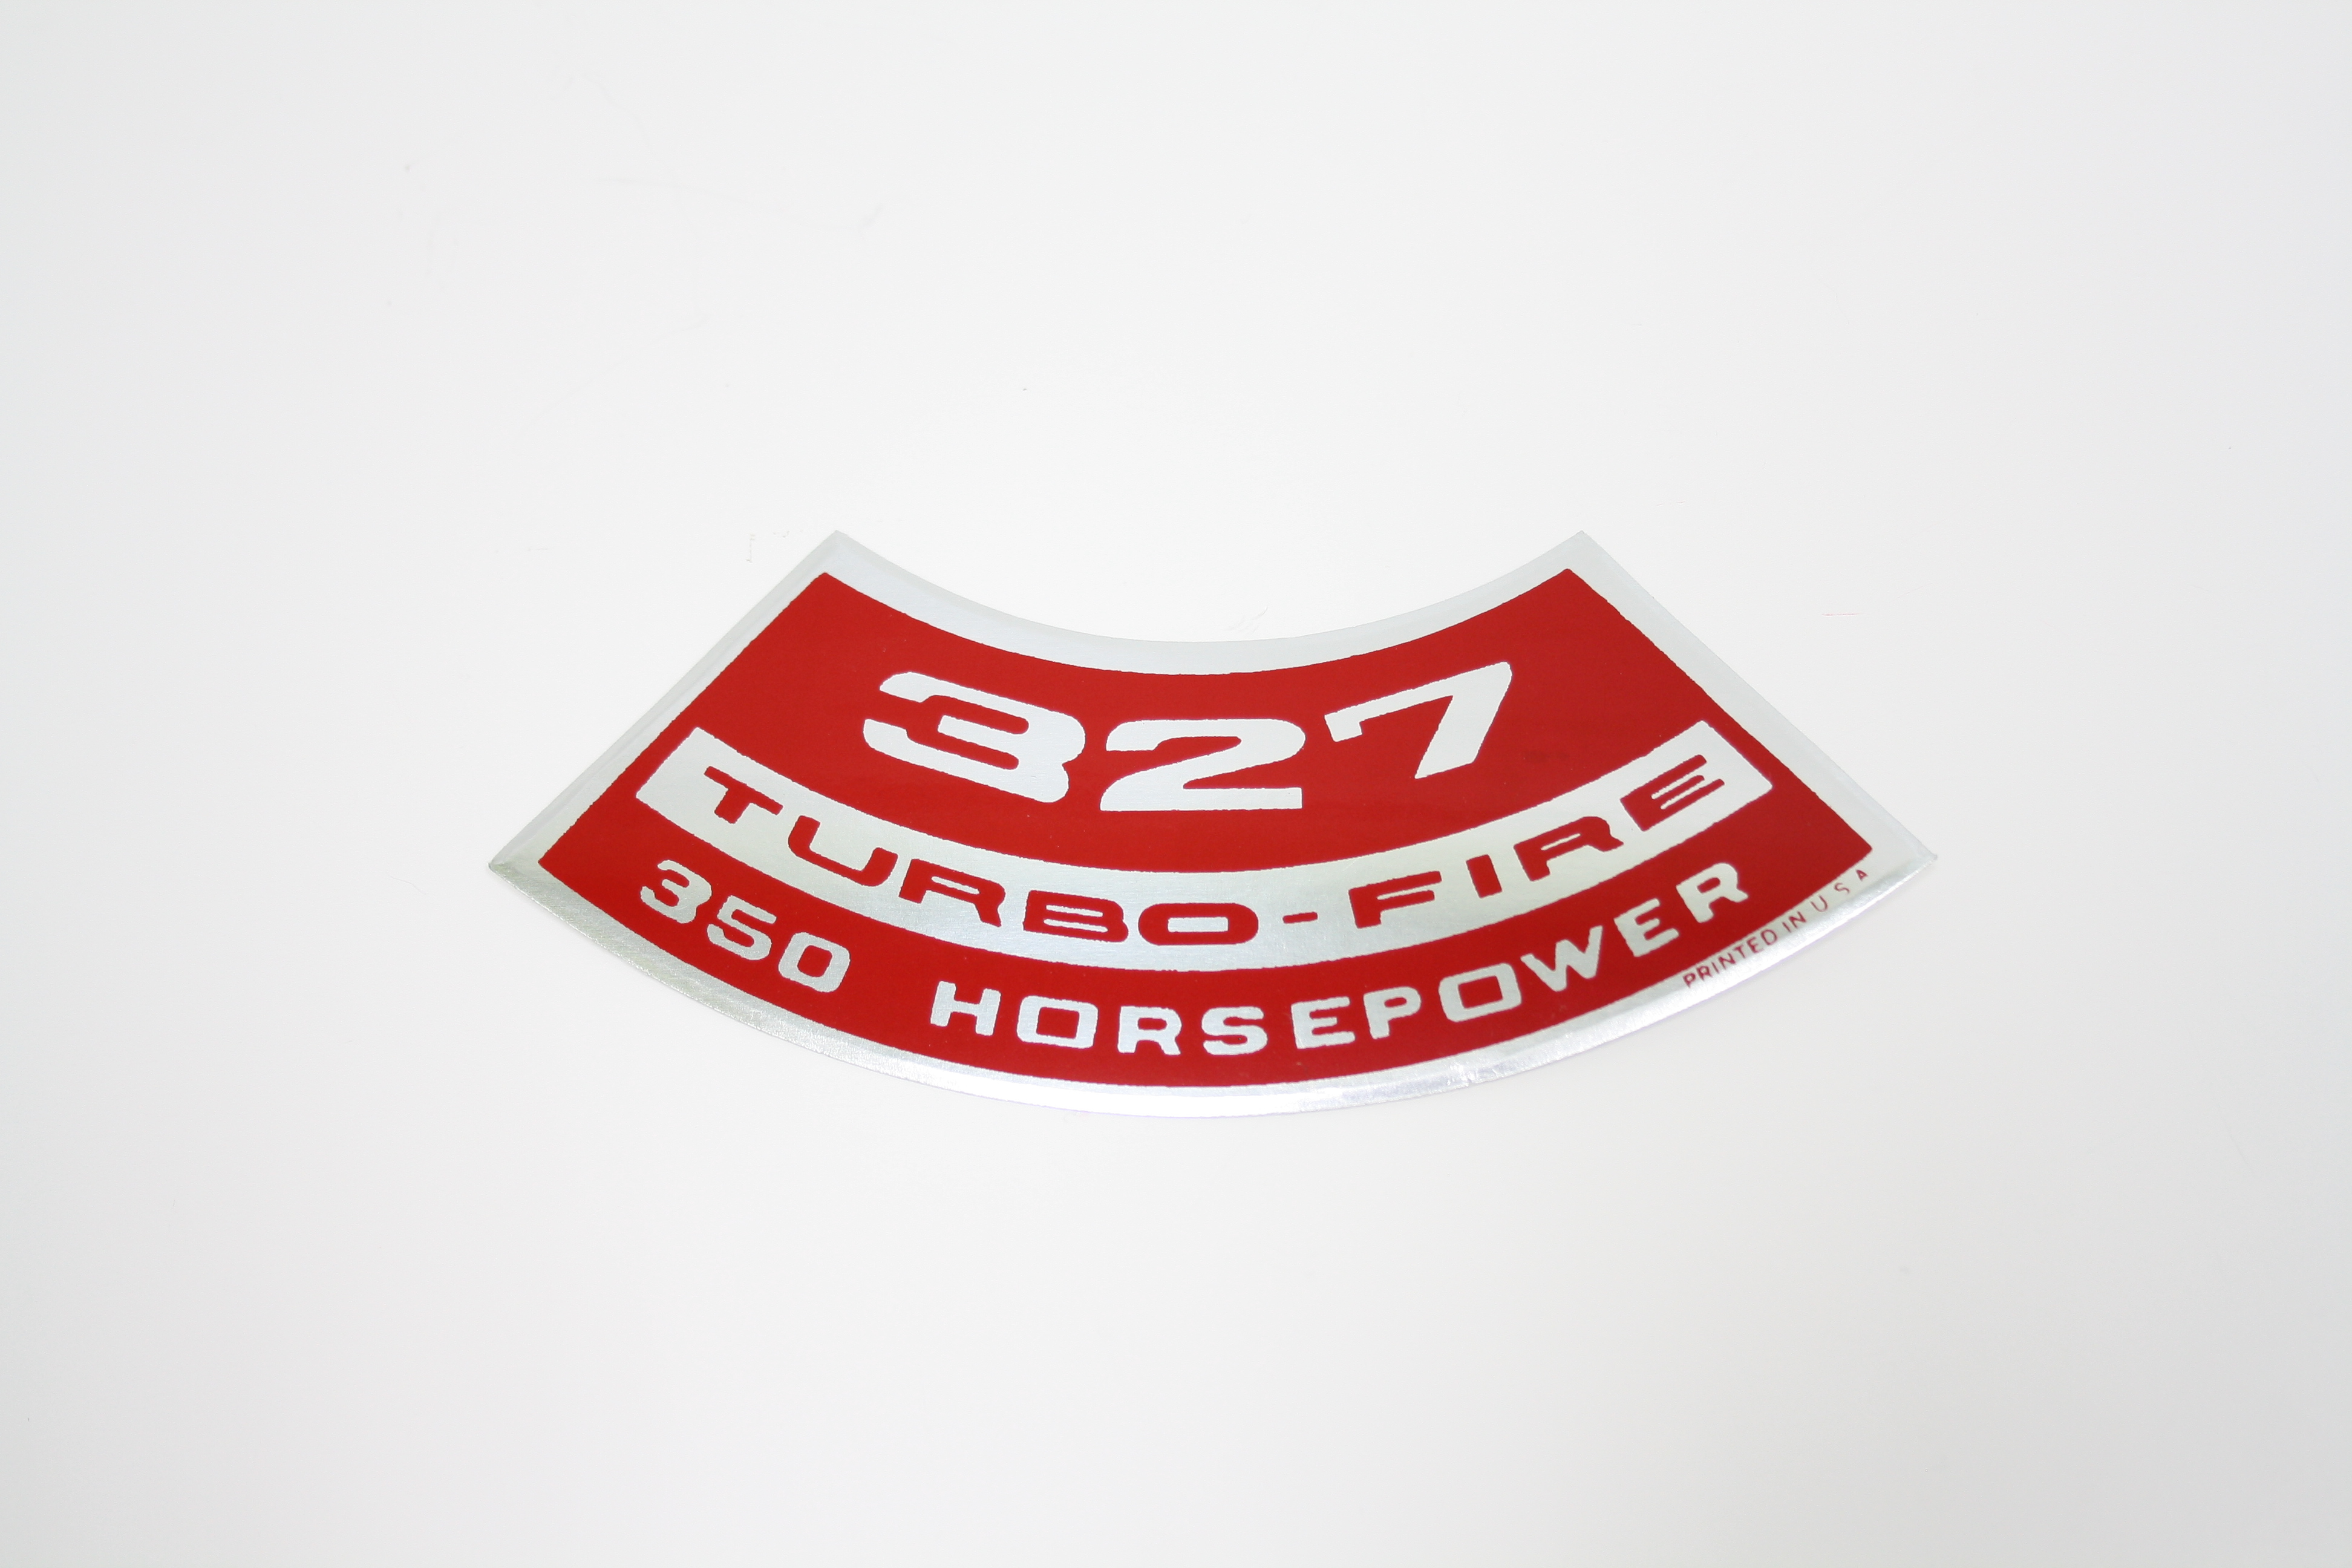 1966-1968 Corvette Air Cleaner Decal 327/350 HP Turbo-Fire